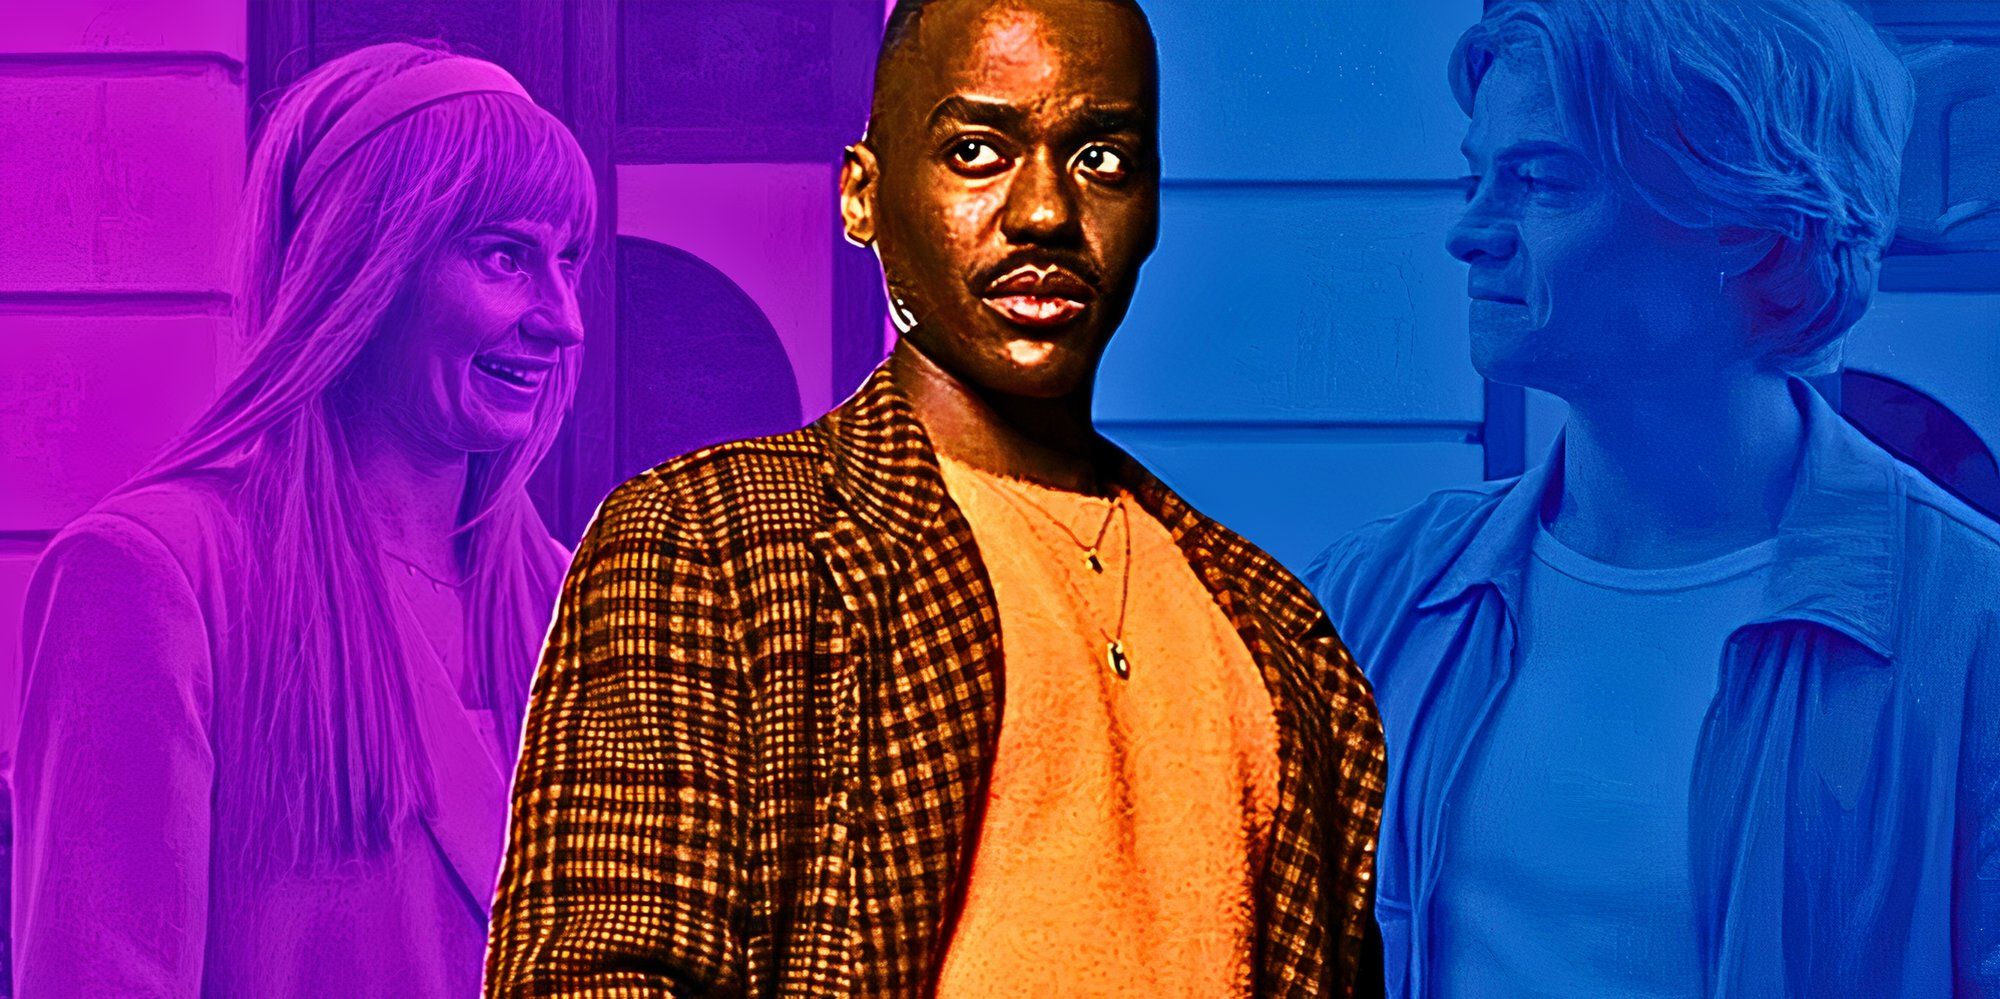 Custom image of Ncuti Gatwa as the Fifteenth Doctor against a backdrop of the Doctor Who characters Lindy Pepper-Bean and Ricky September